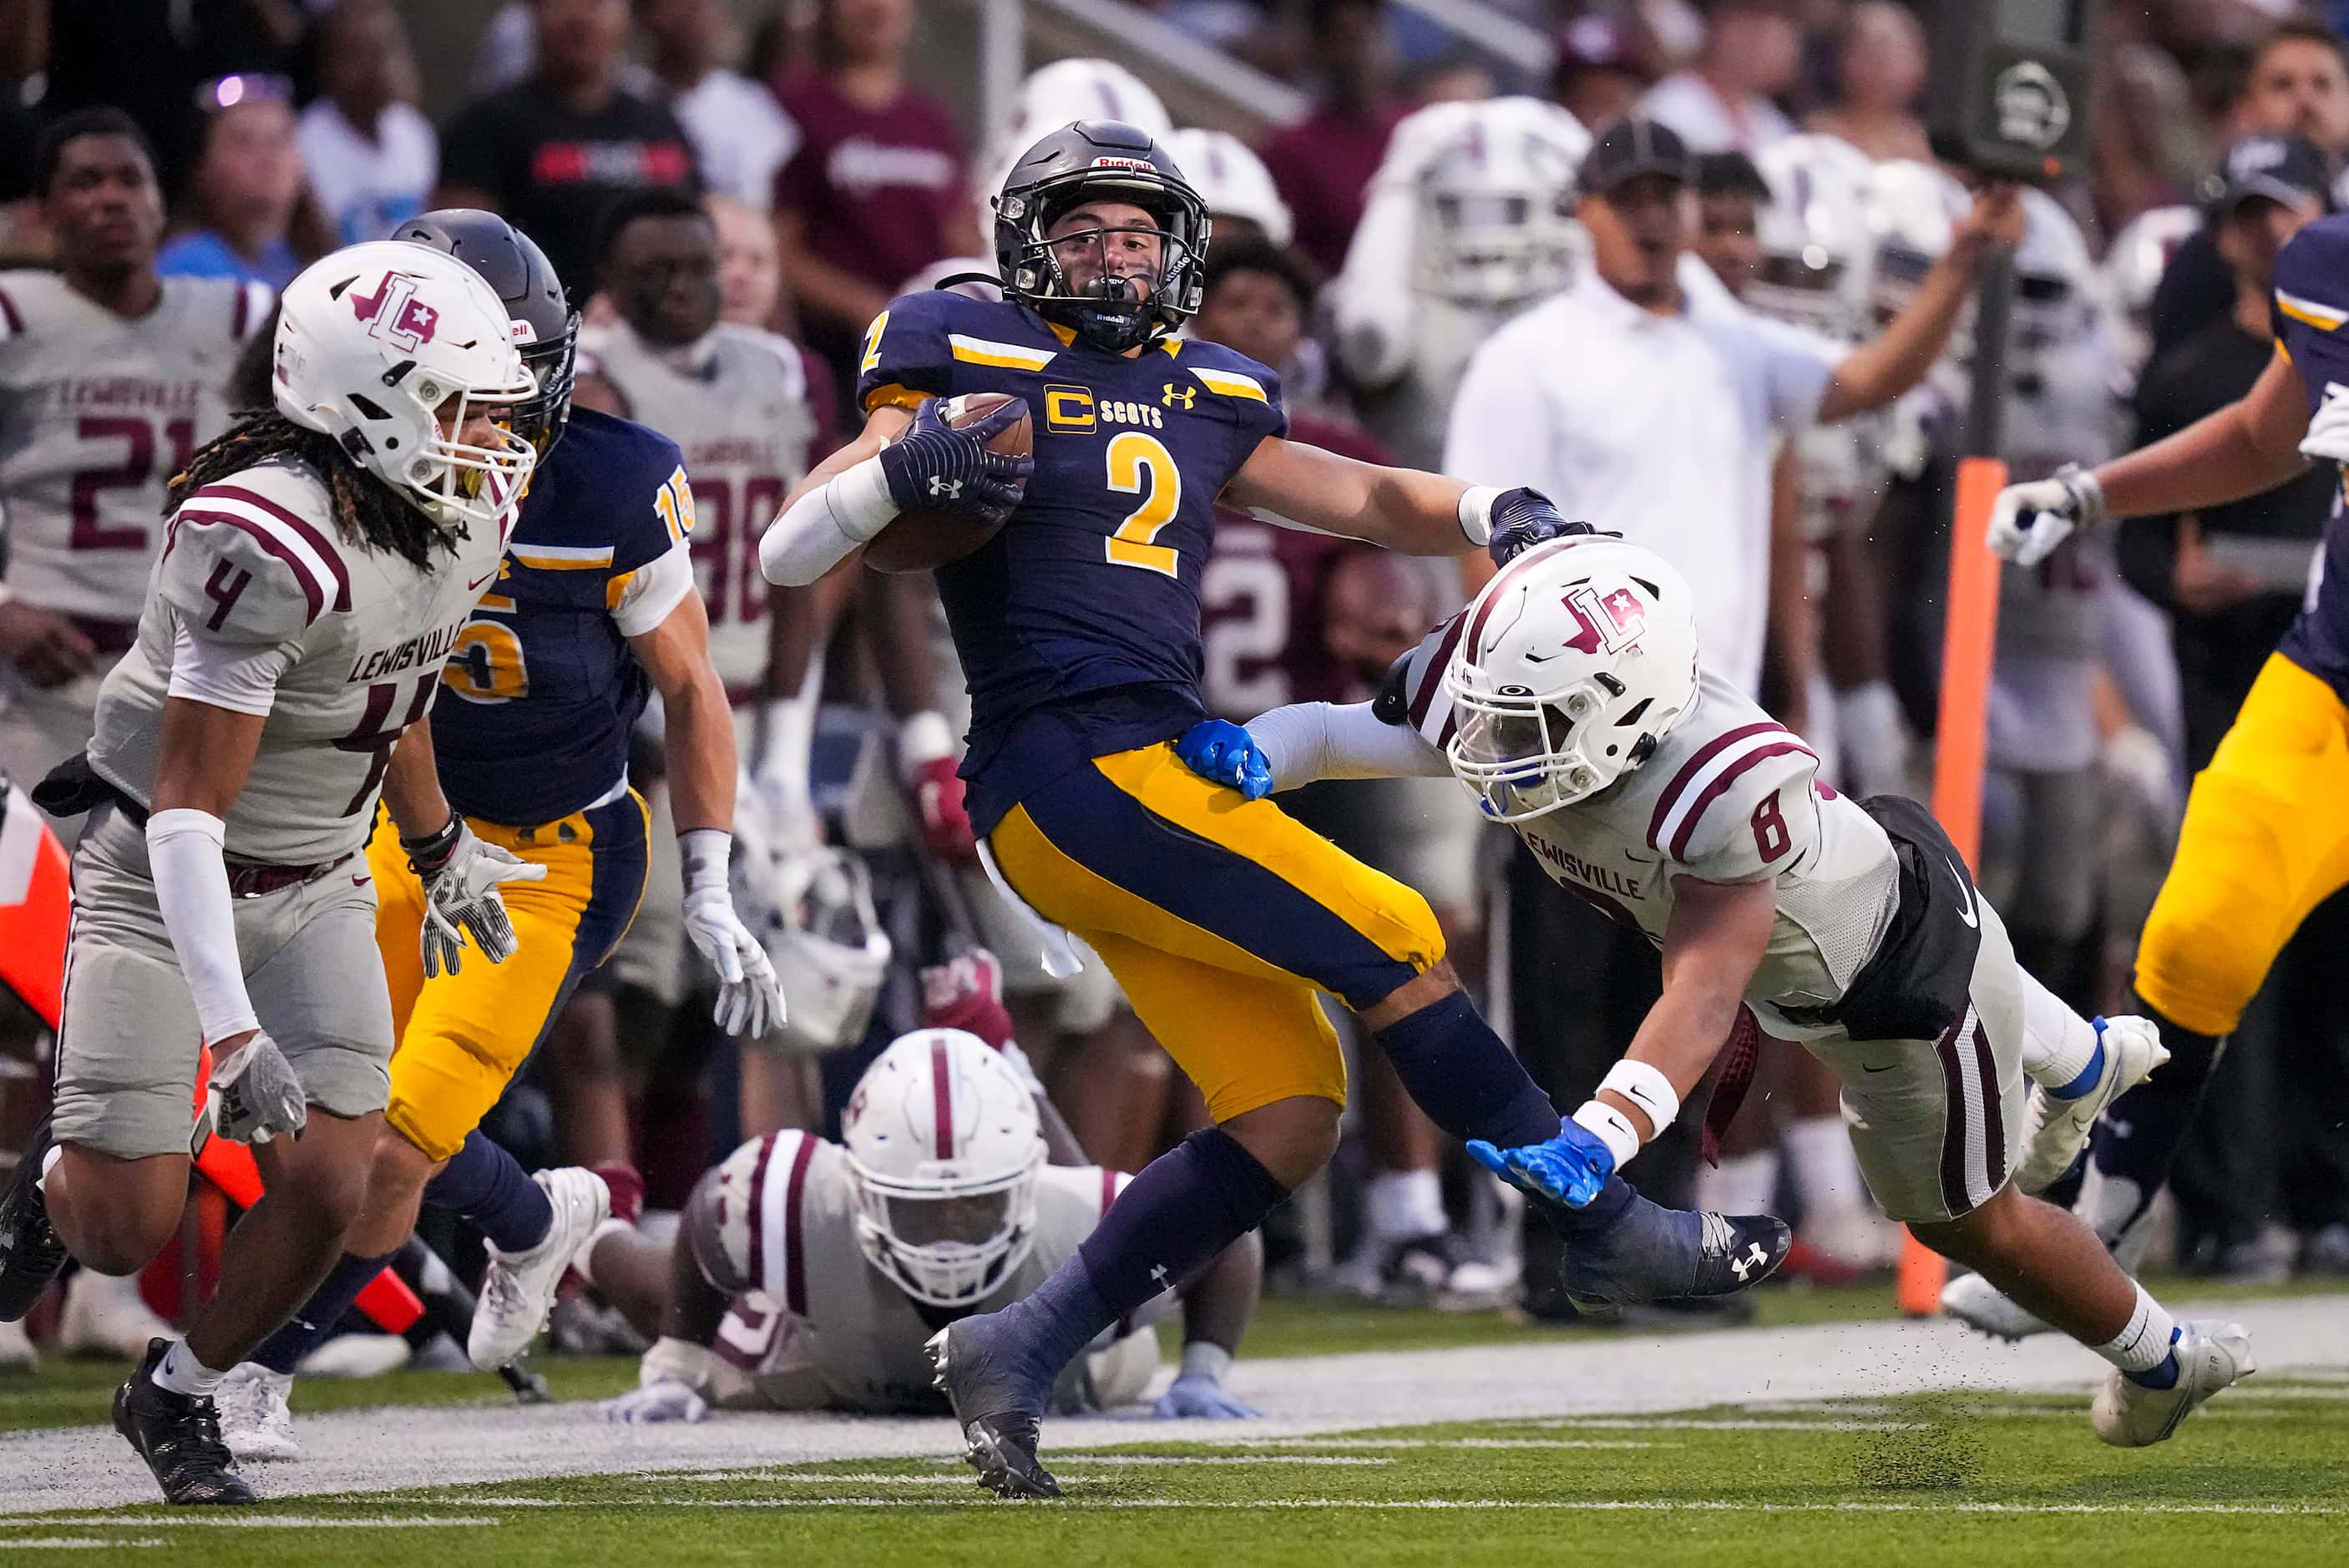 Highland Park running back Wilson Axley (2) is knocked out of bounds by Lewisville...